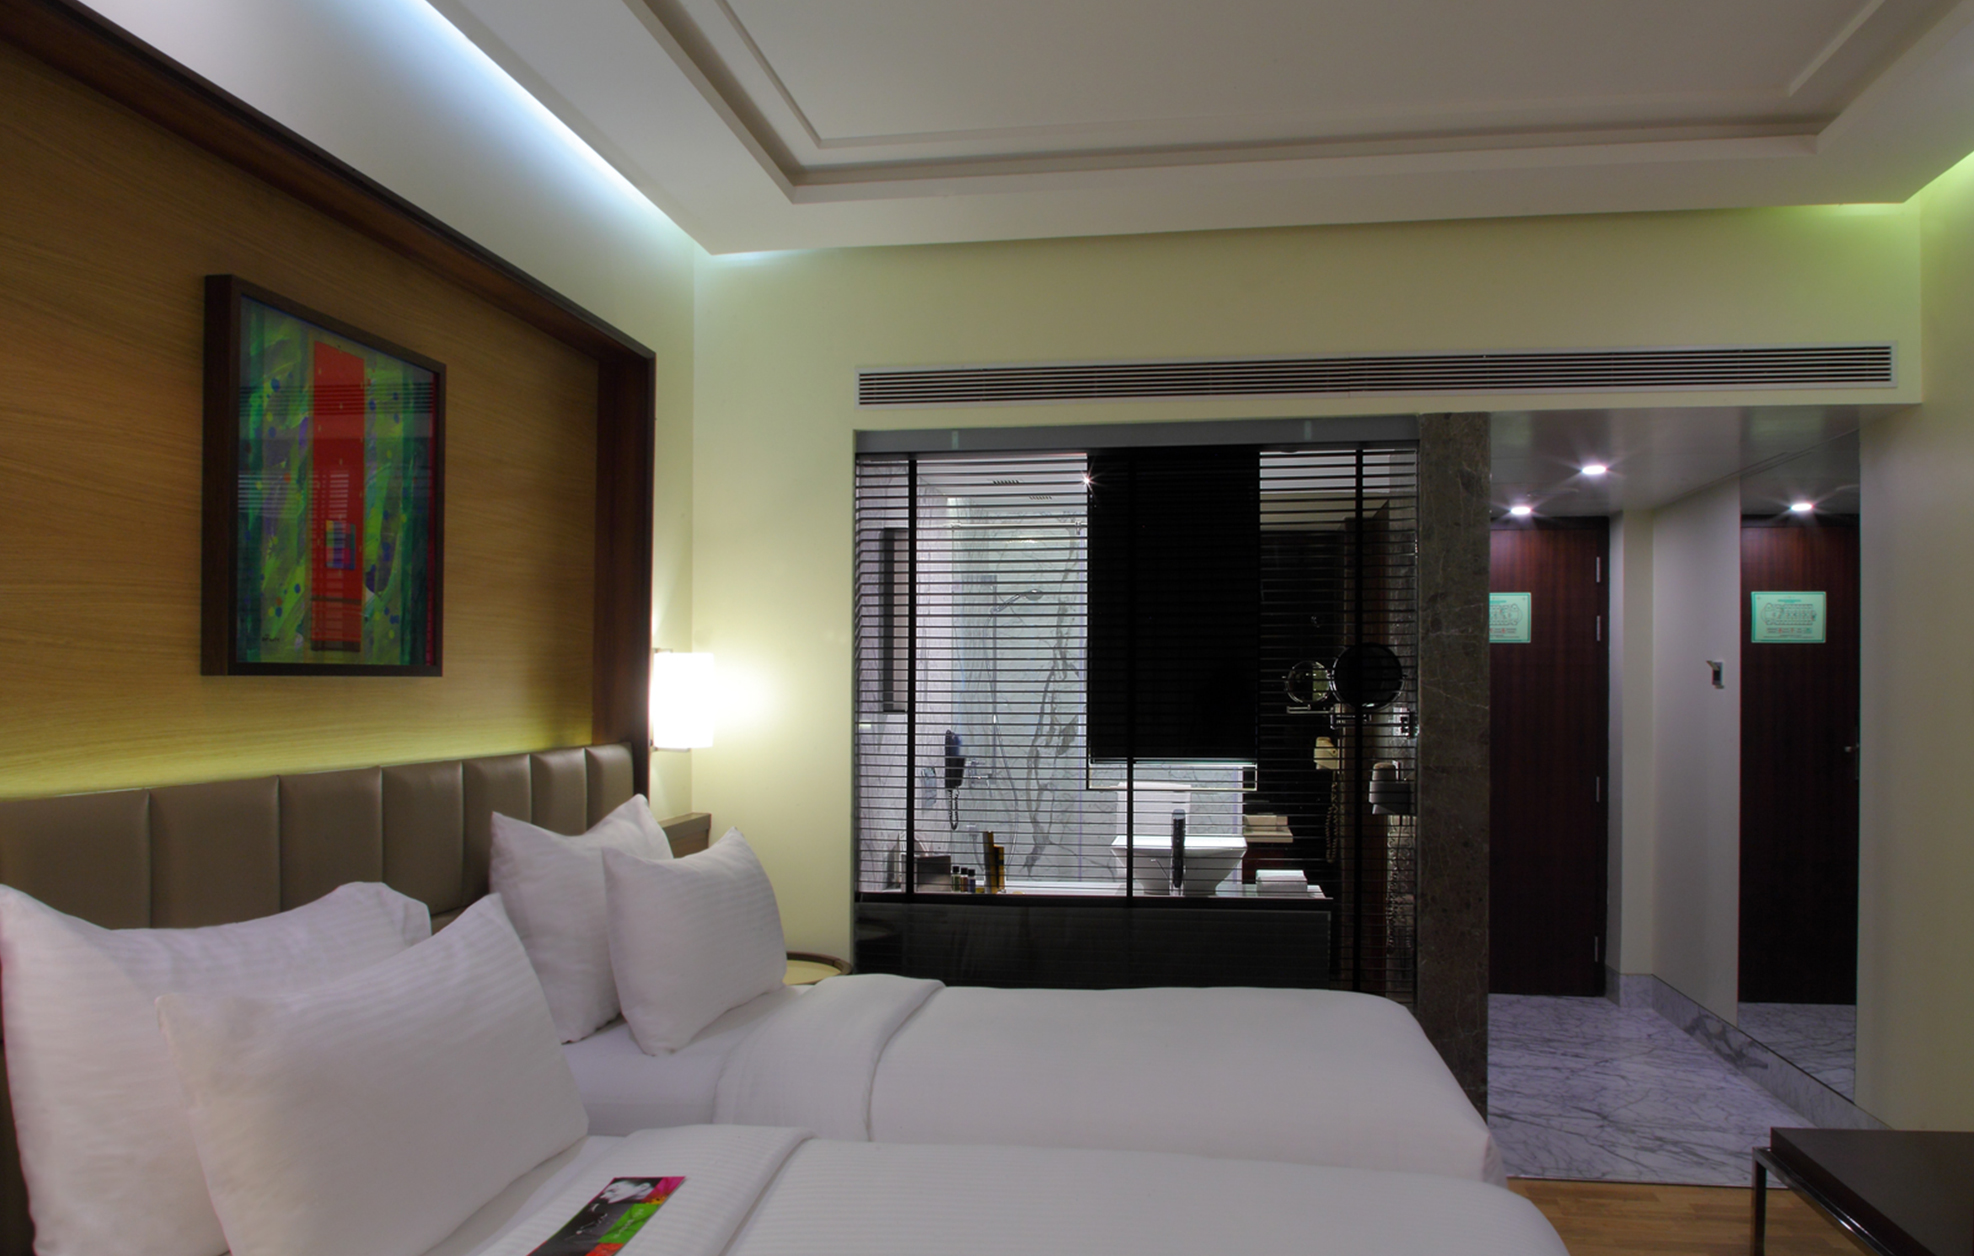 Club Myra Room Overview - The Mirador at Andheri East